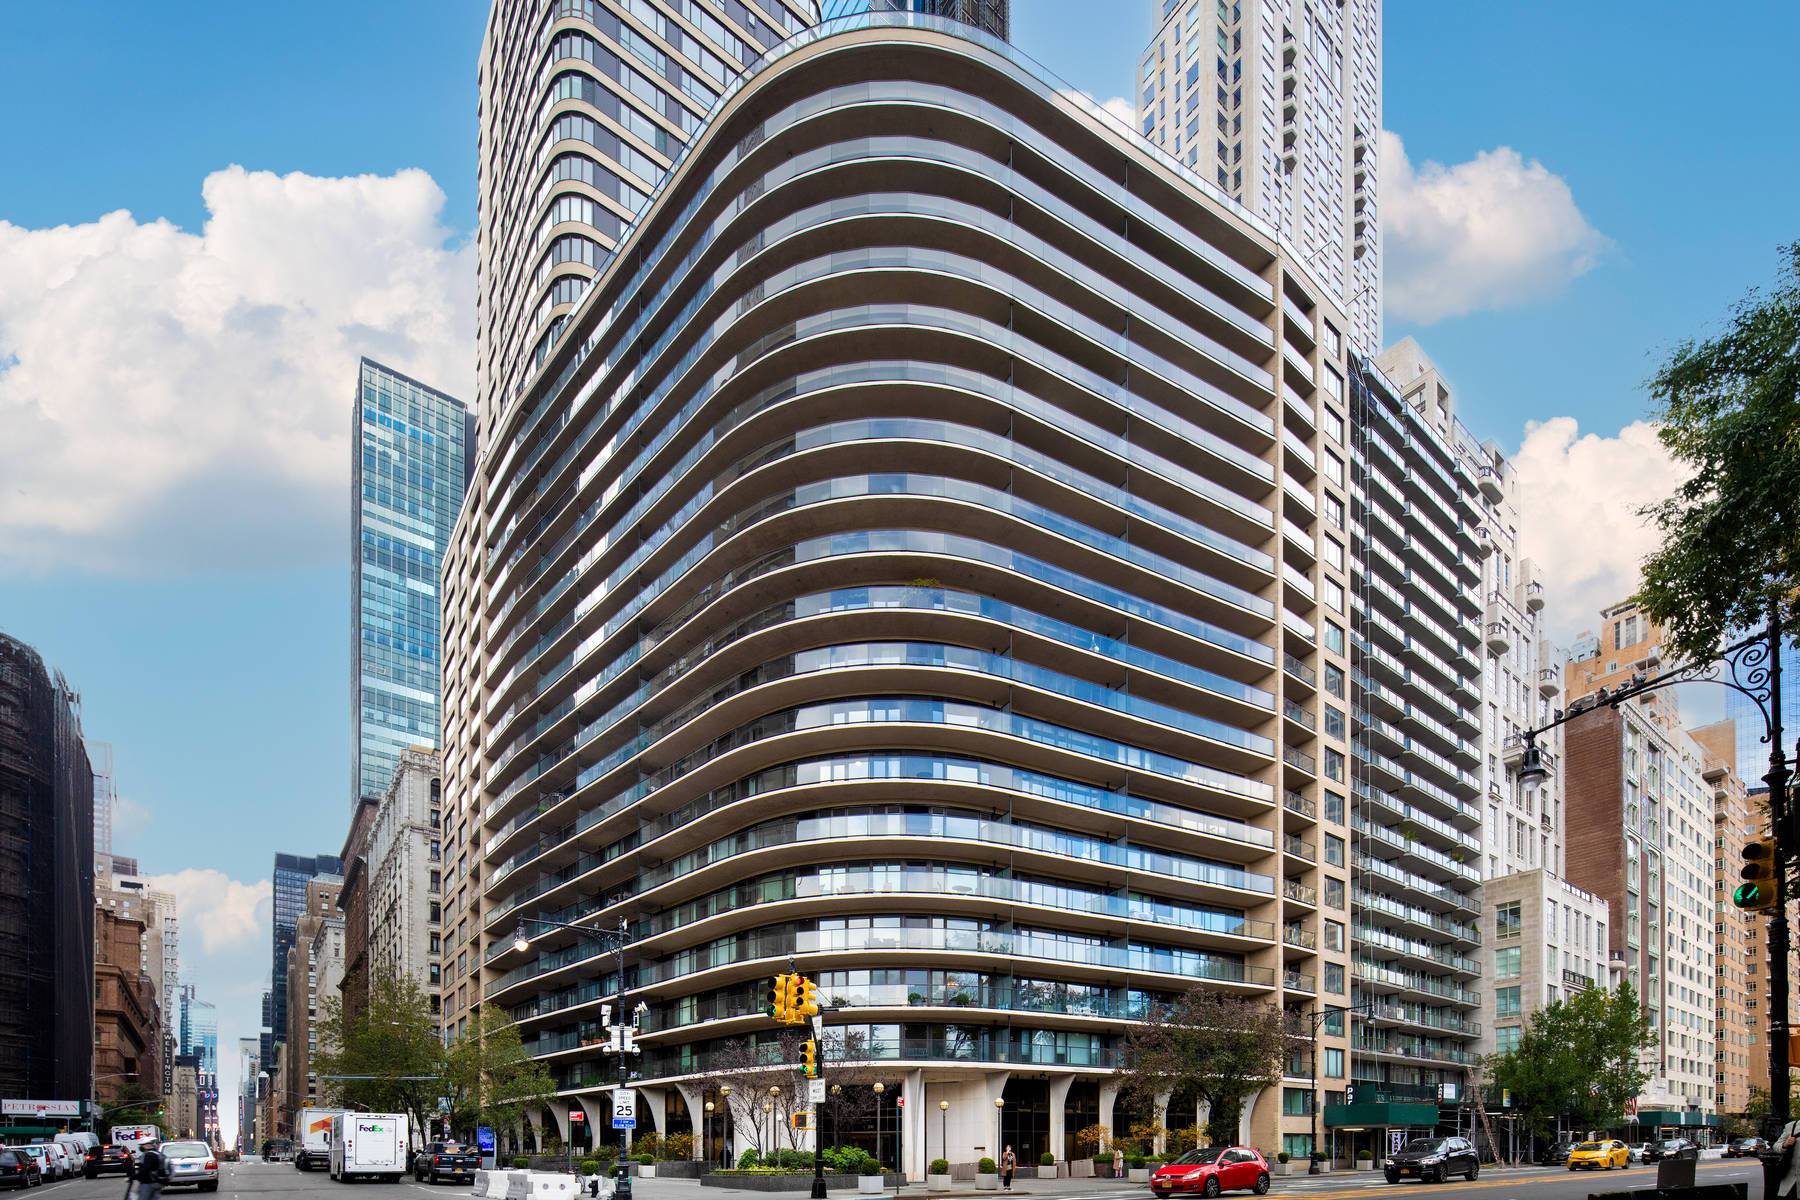 Building exterior at 200 Central Park South